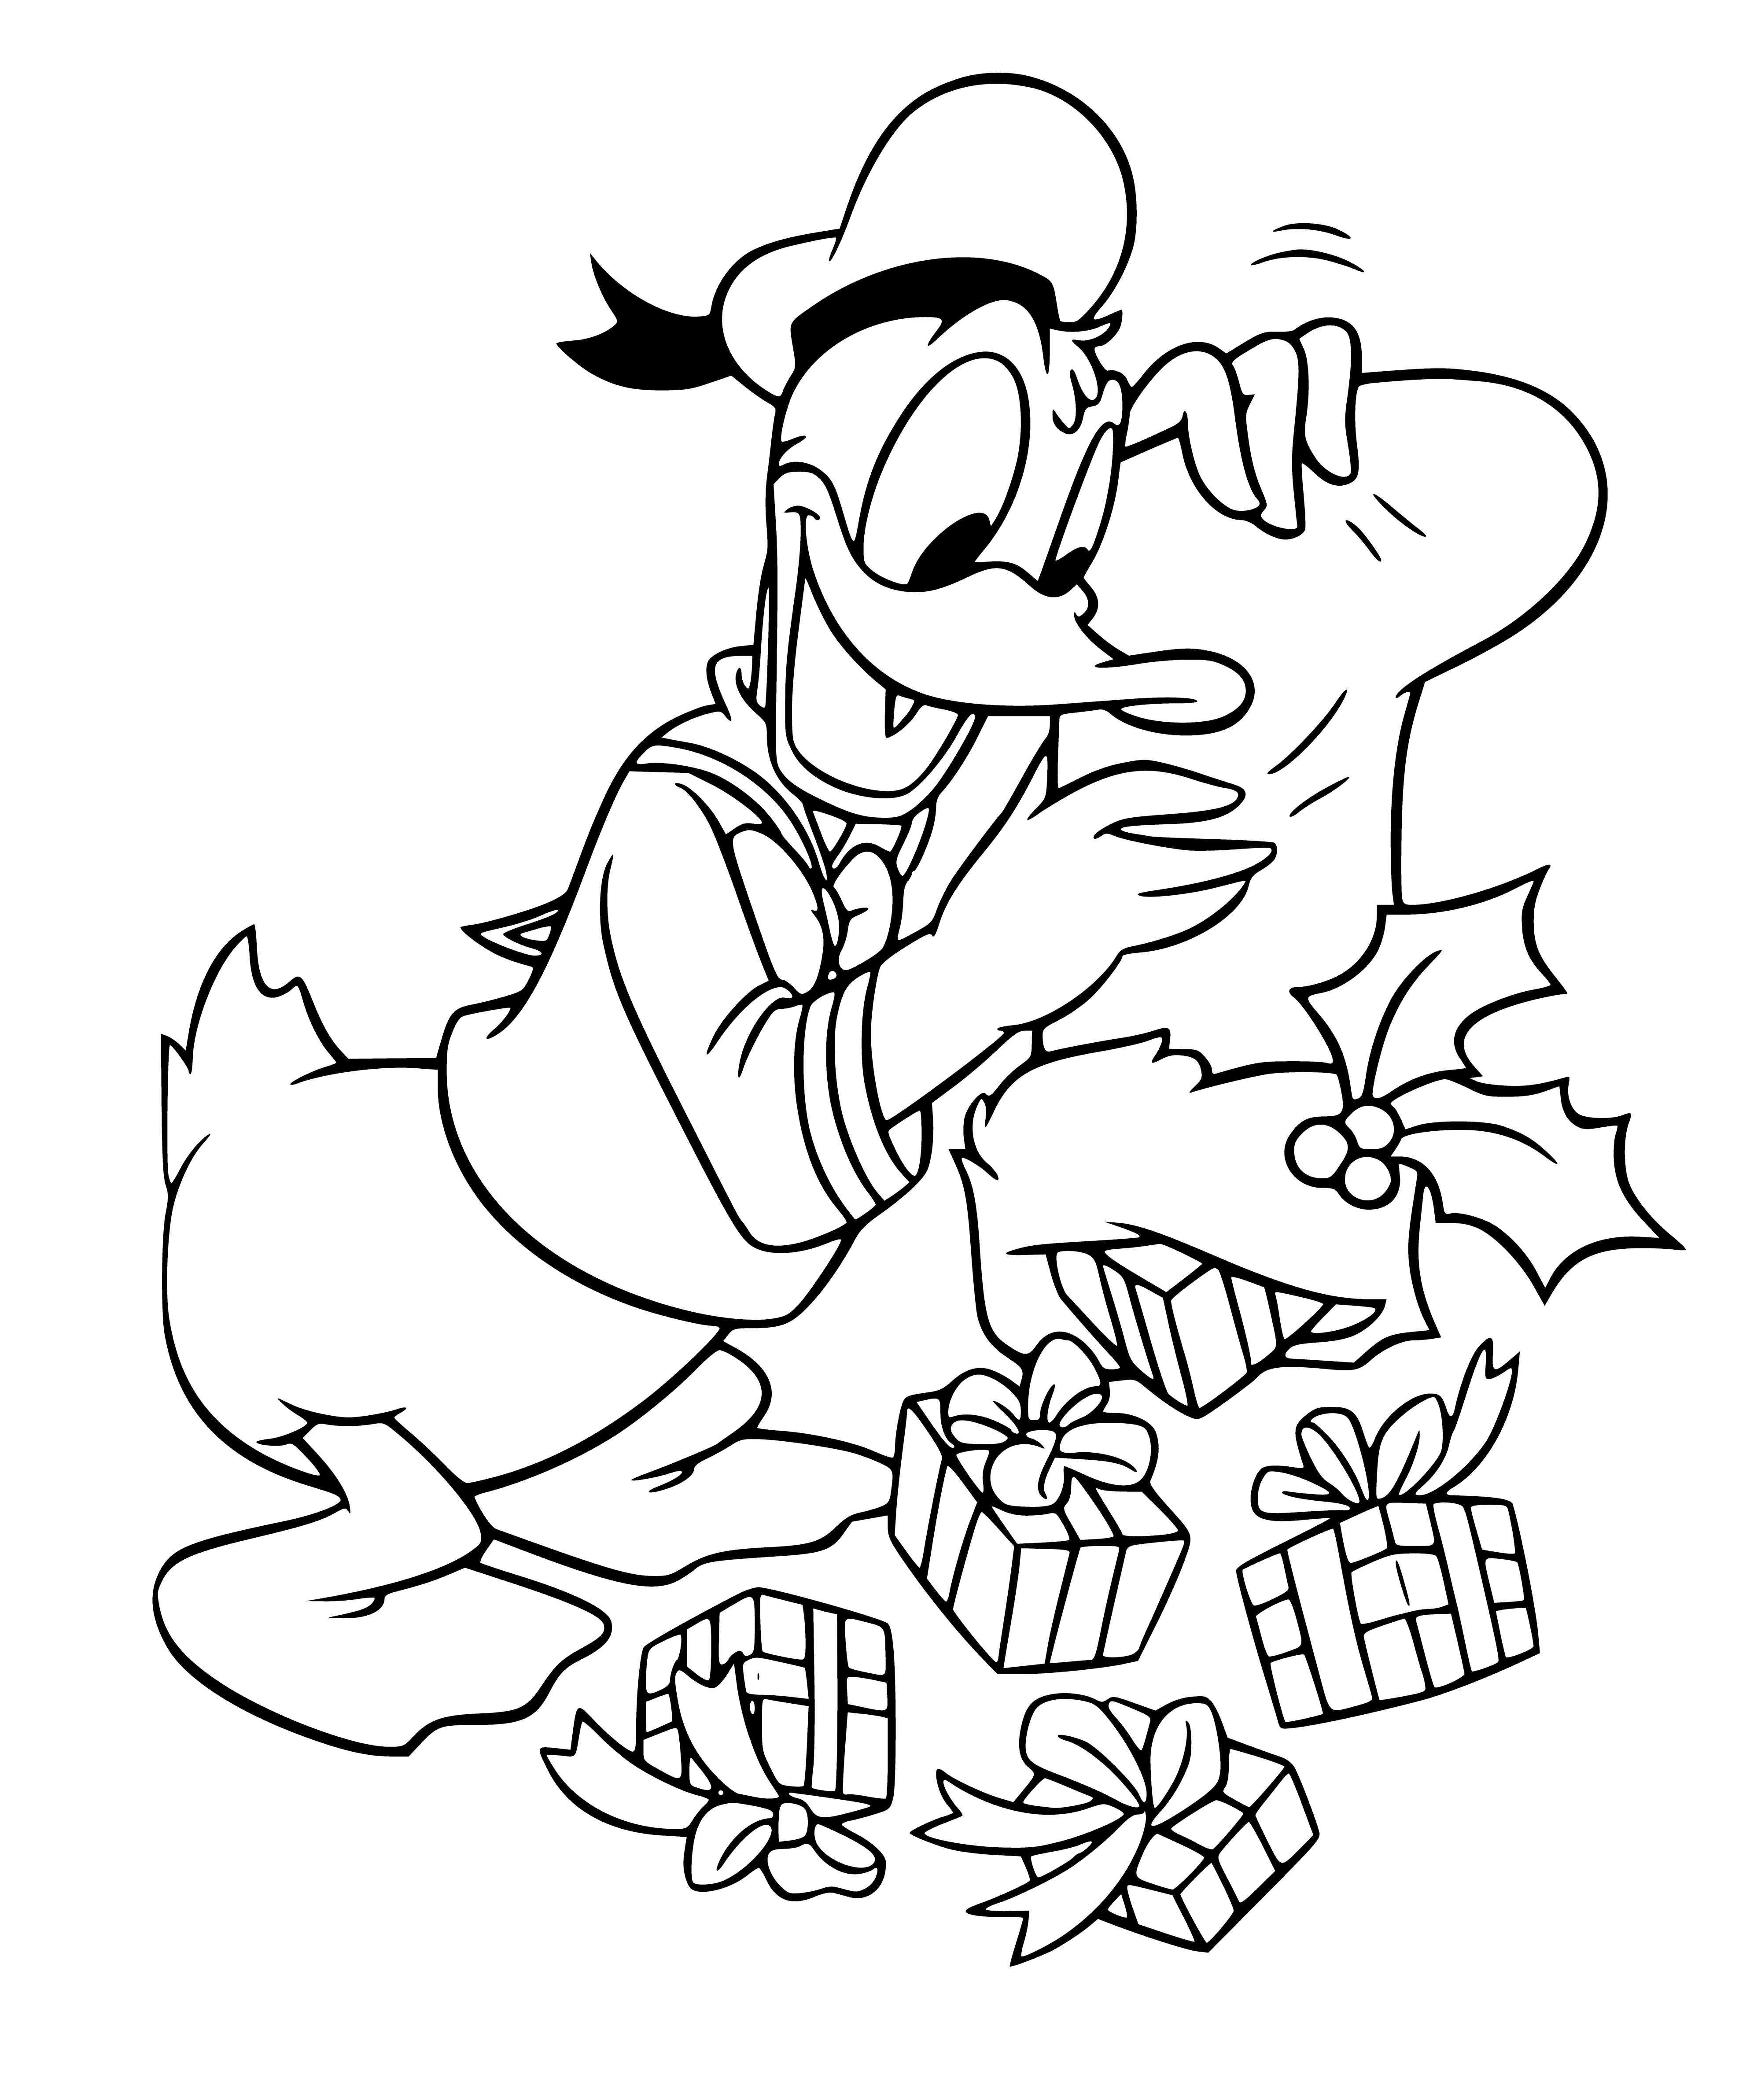 Donald kneels before a twinkling tree, gifts piled around him, a big smile to share the holiday joy.